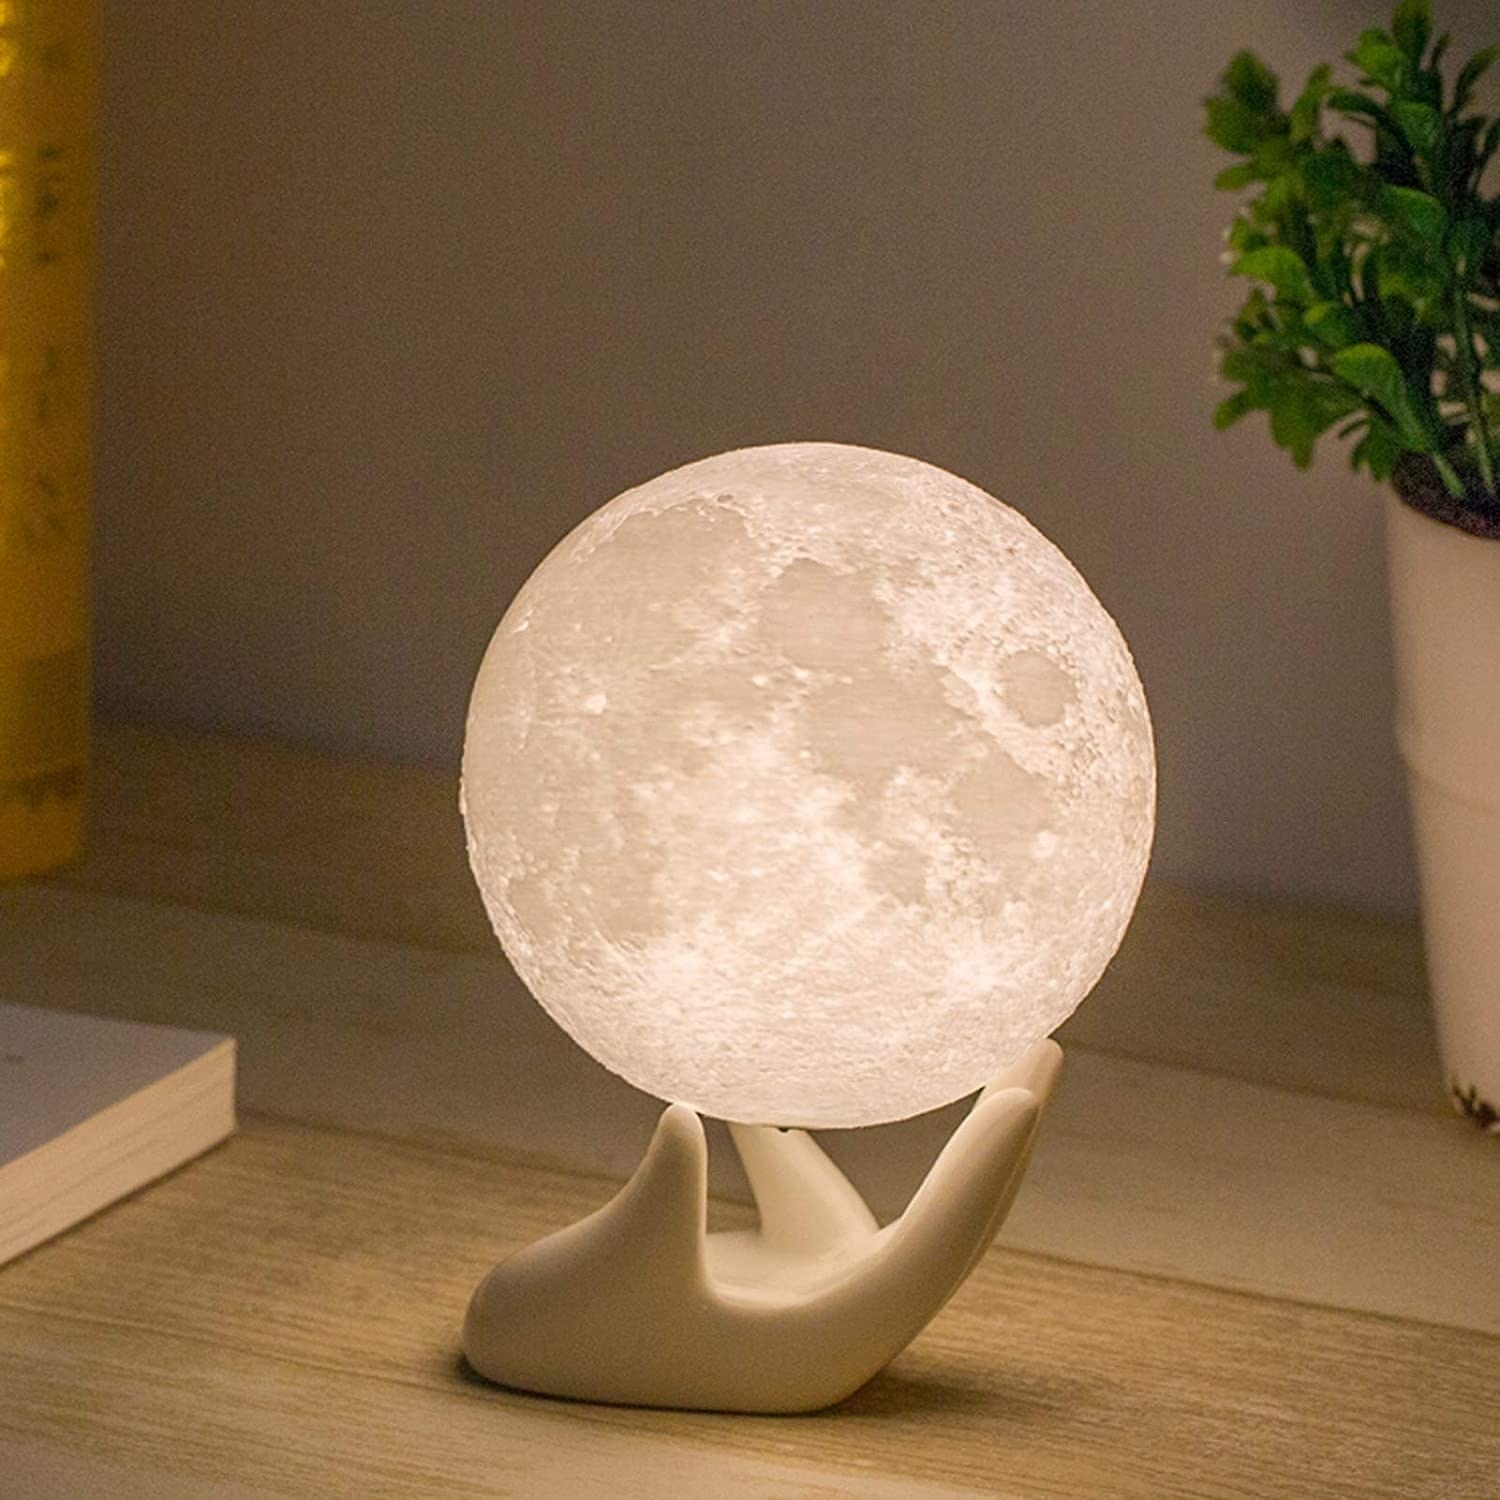 the moon lamp on a hand stand